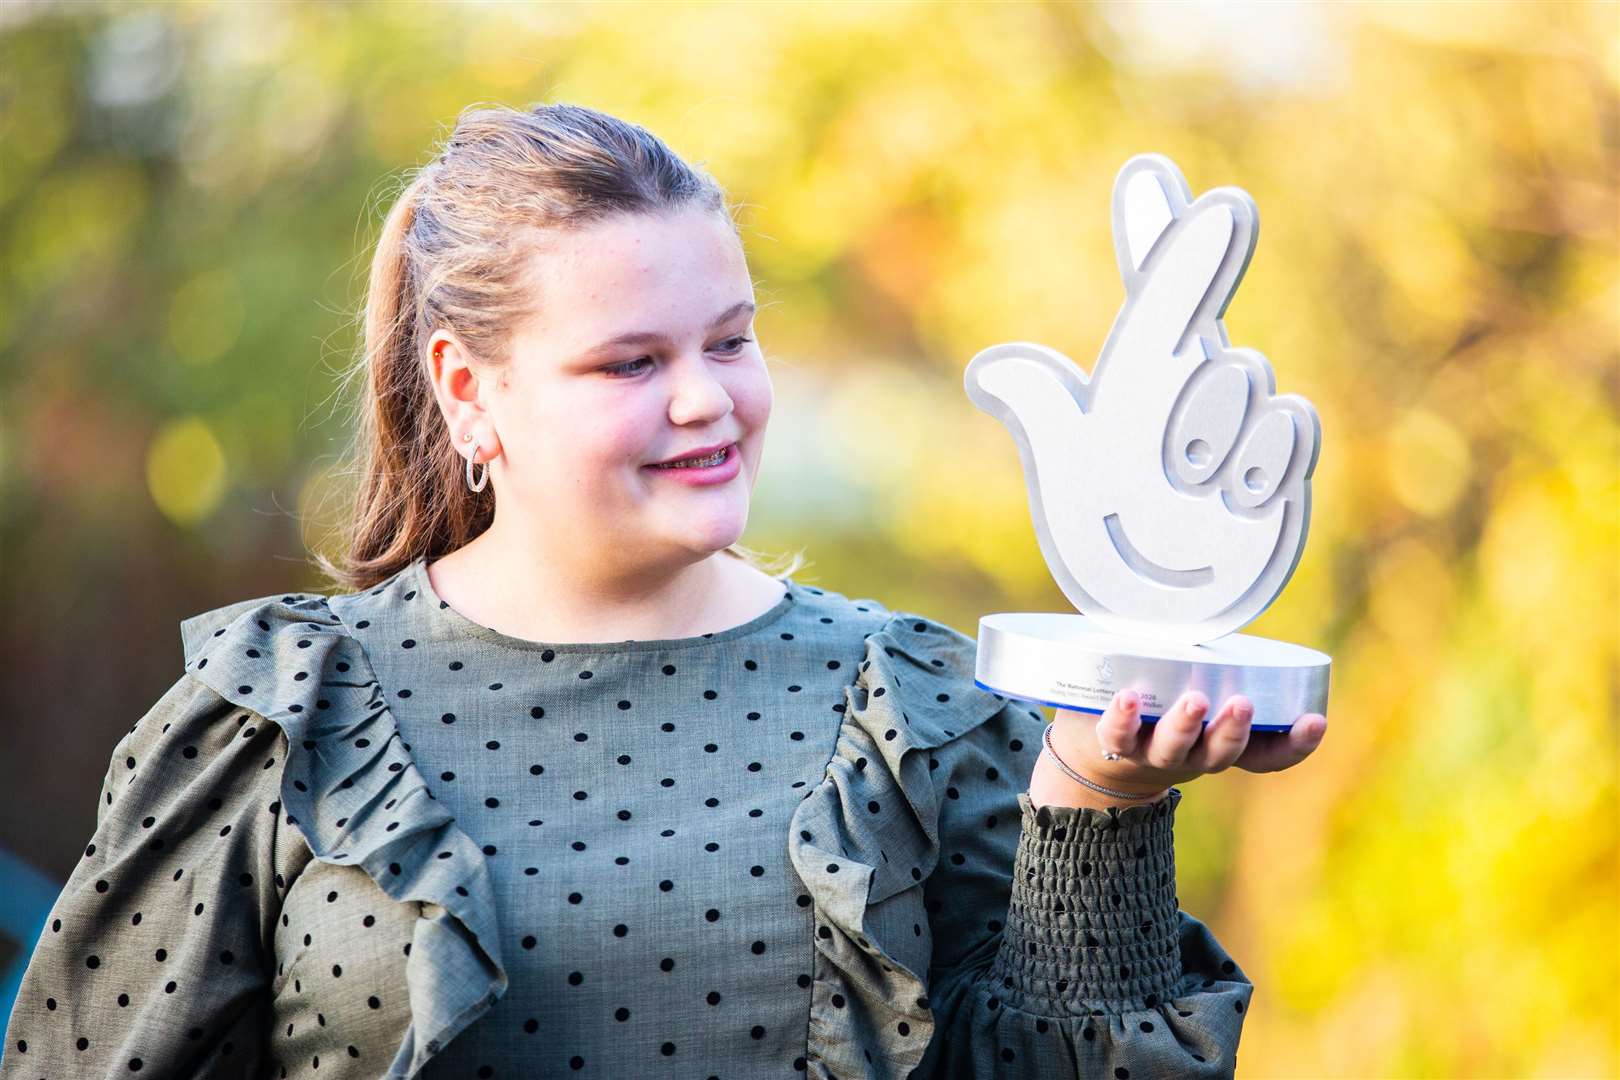 Isle of Sheppey teen Caitlin Walker received the award from YouTube star Saffron Barker